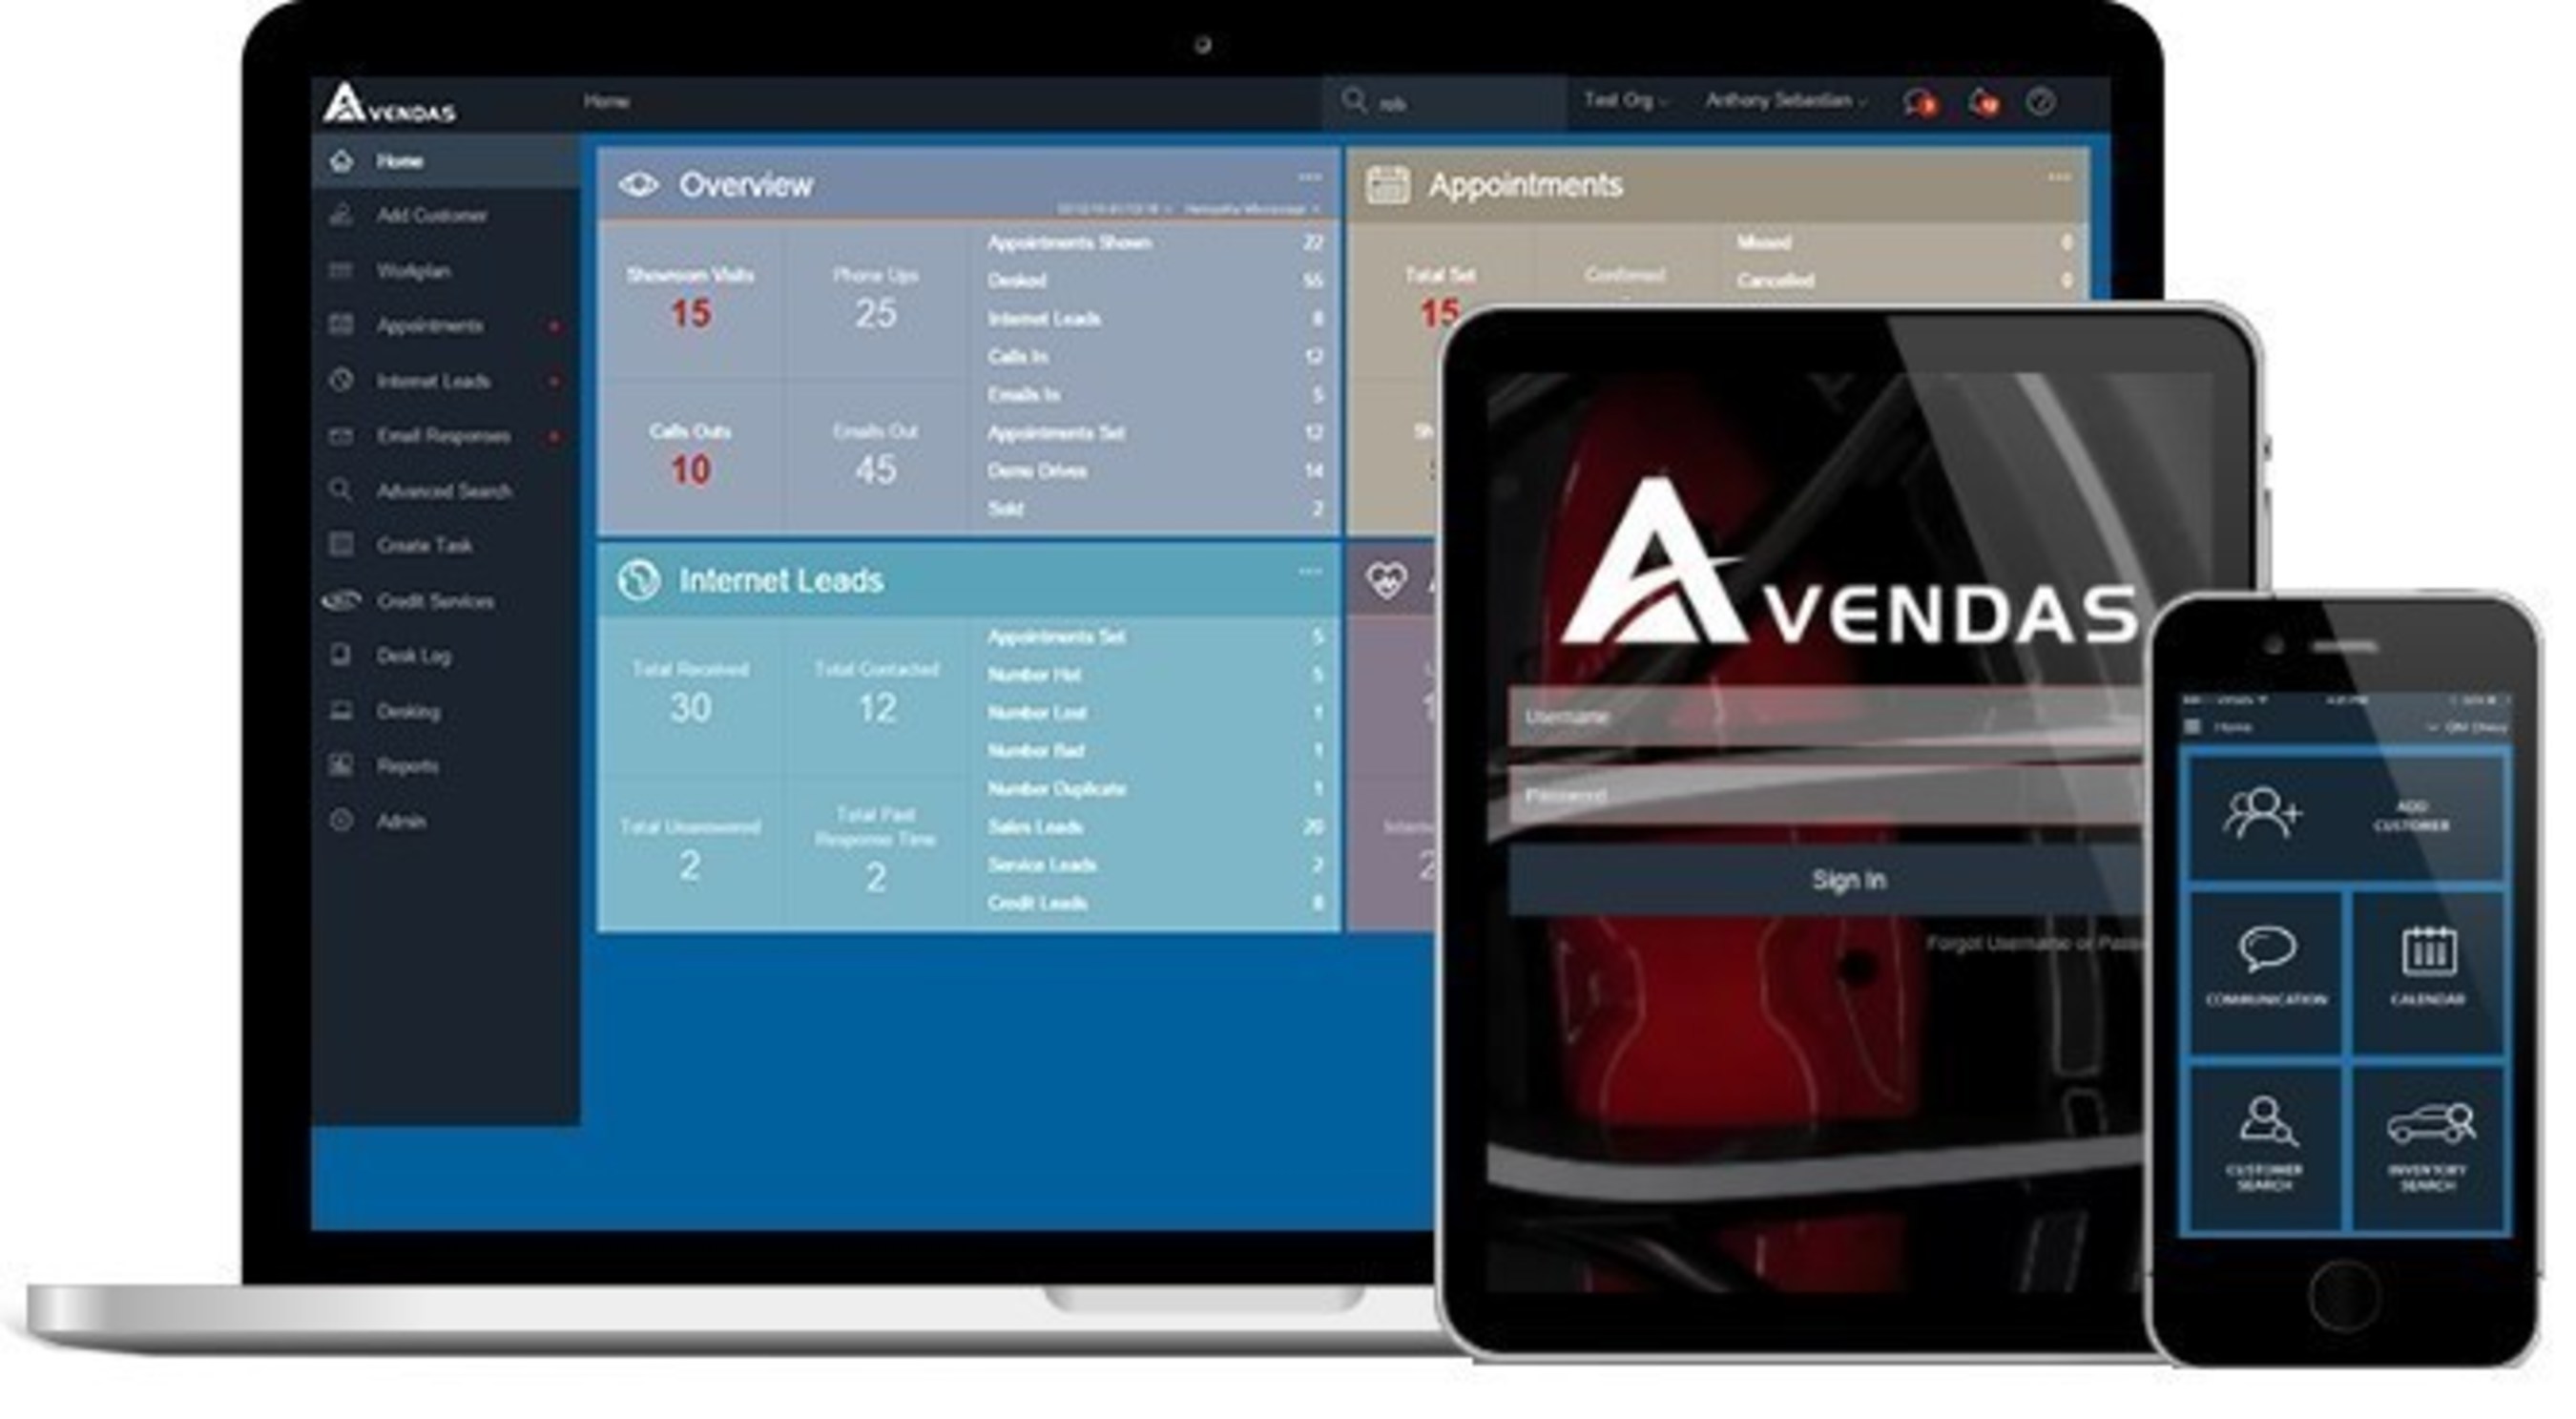 Avendas CRM is built on a responsive design platform providing the best user experience from any device or location.